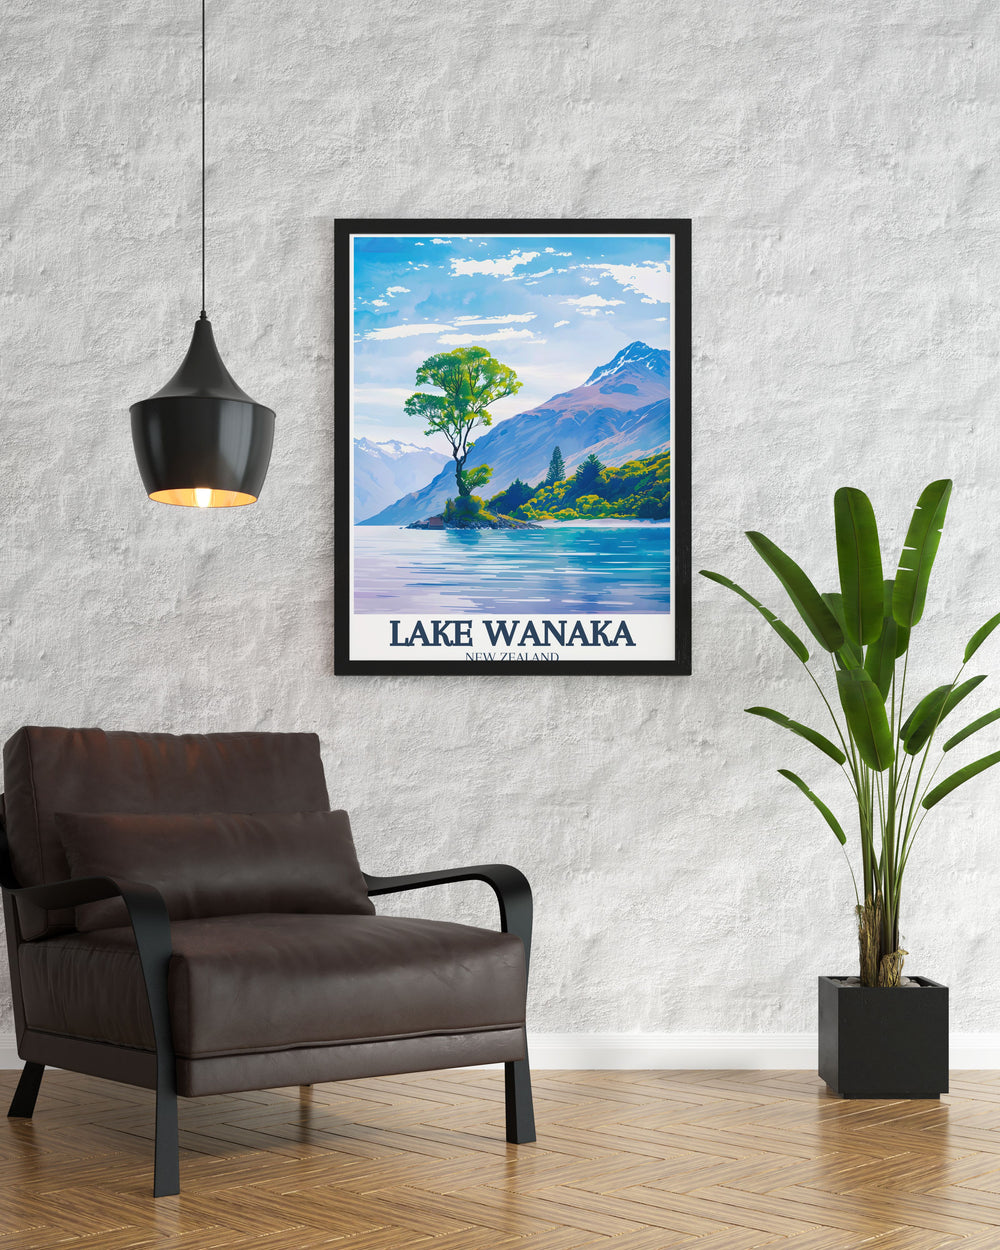 Elegant Lake Wanaka poster showcasing the tranquil lake wanaka tree in Mount Aspiring National Park Ideal New Zealand decor for those who love modern prints and wish to add a touch of nature to their living room or bedroom